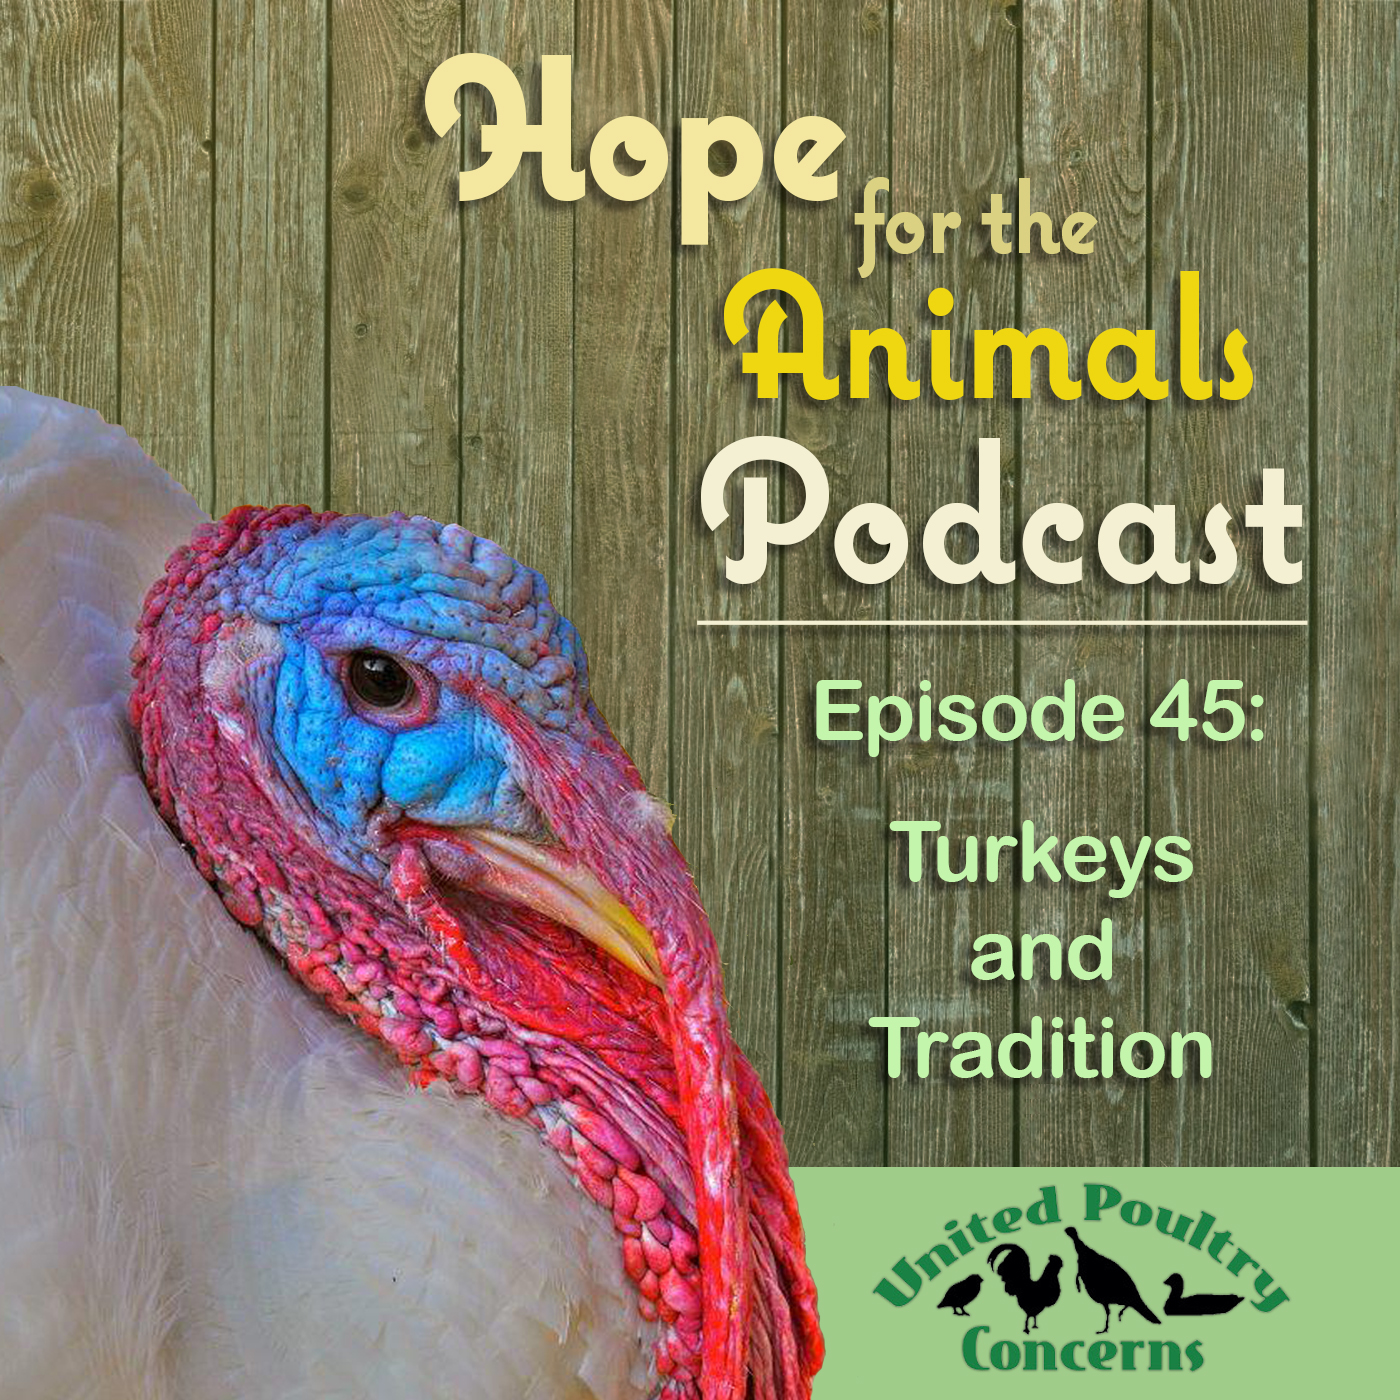 Episode 45: Turkeys and Tradition